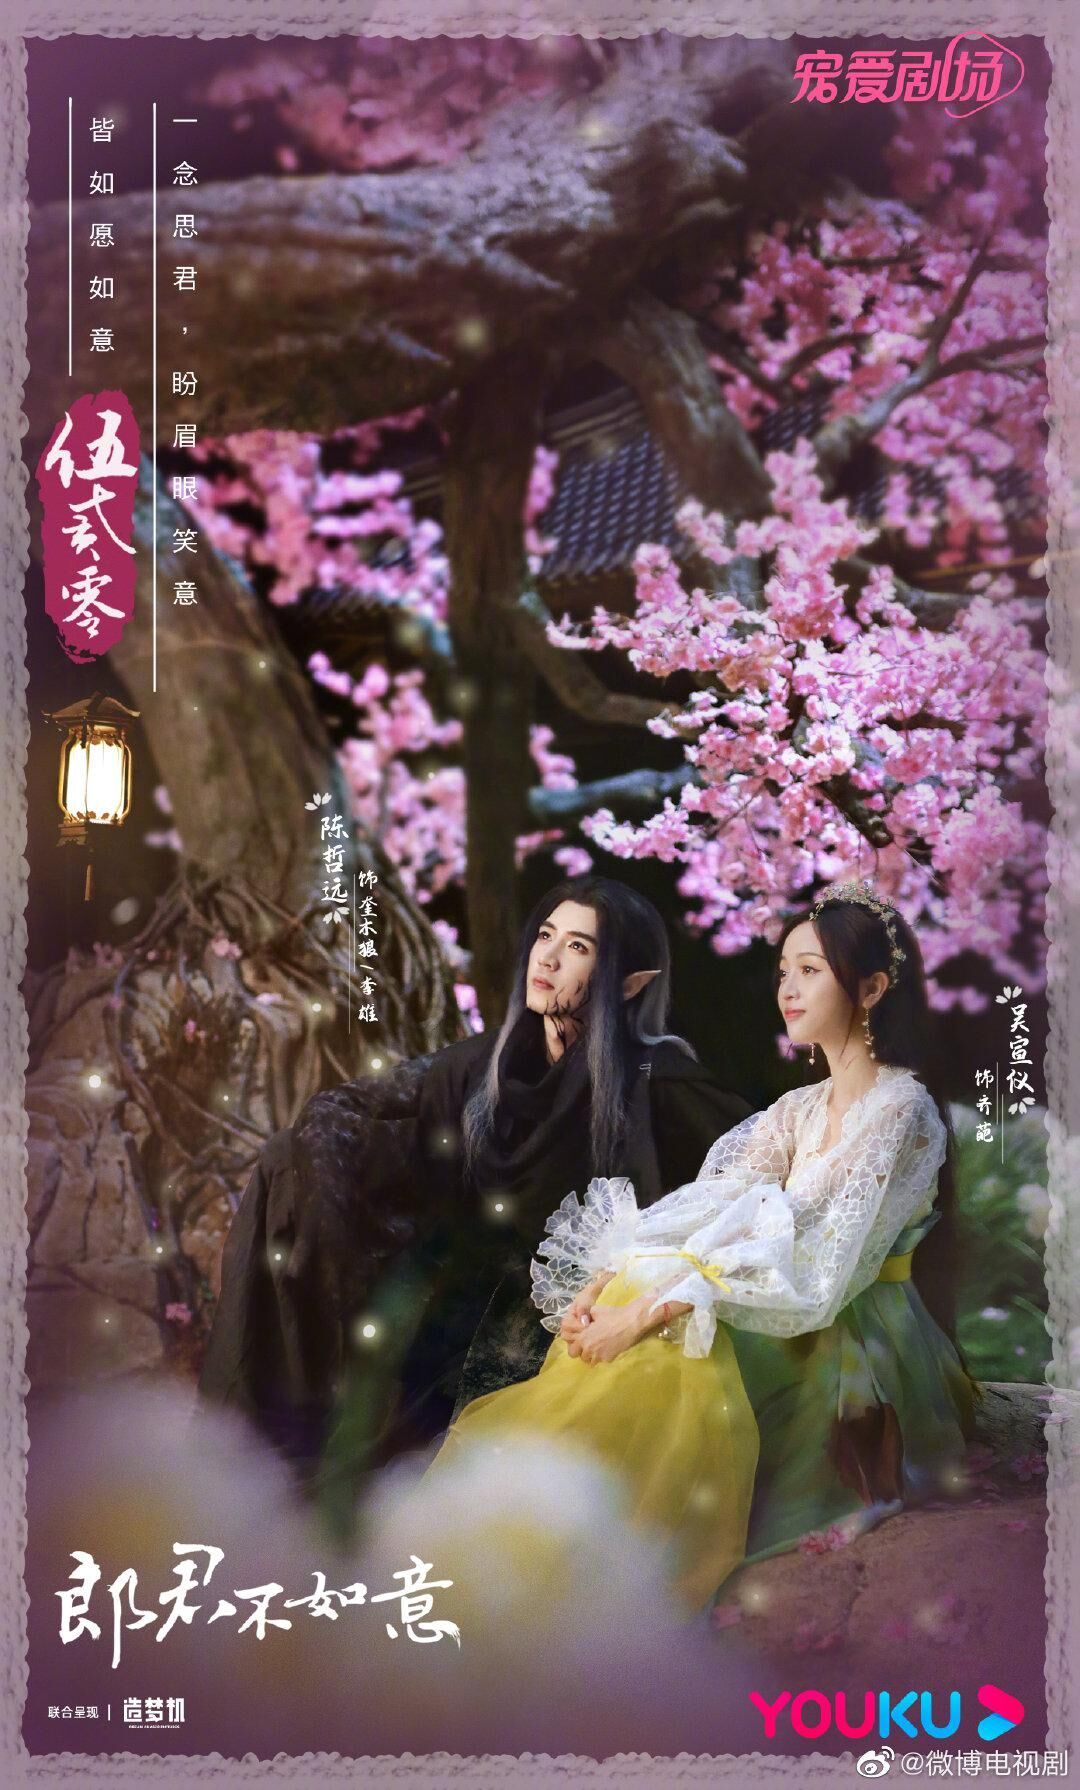 The Princess and the Werewolf with Chen Zheyuan